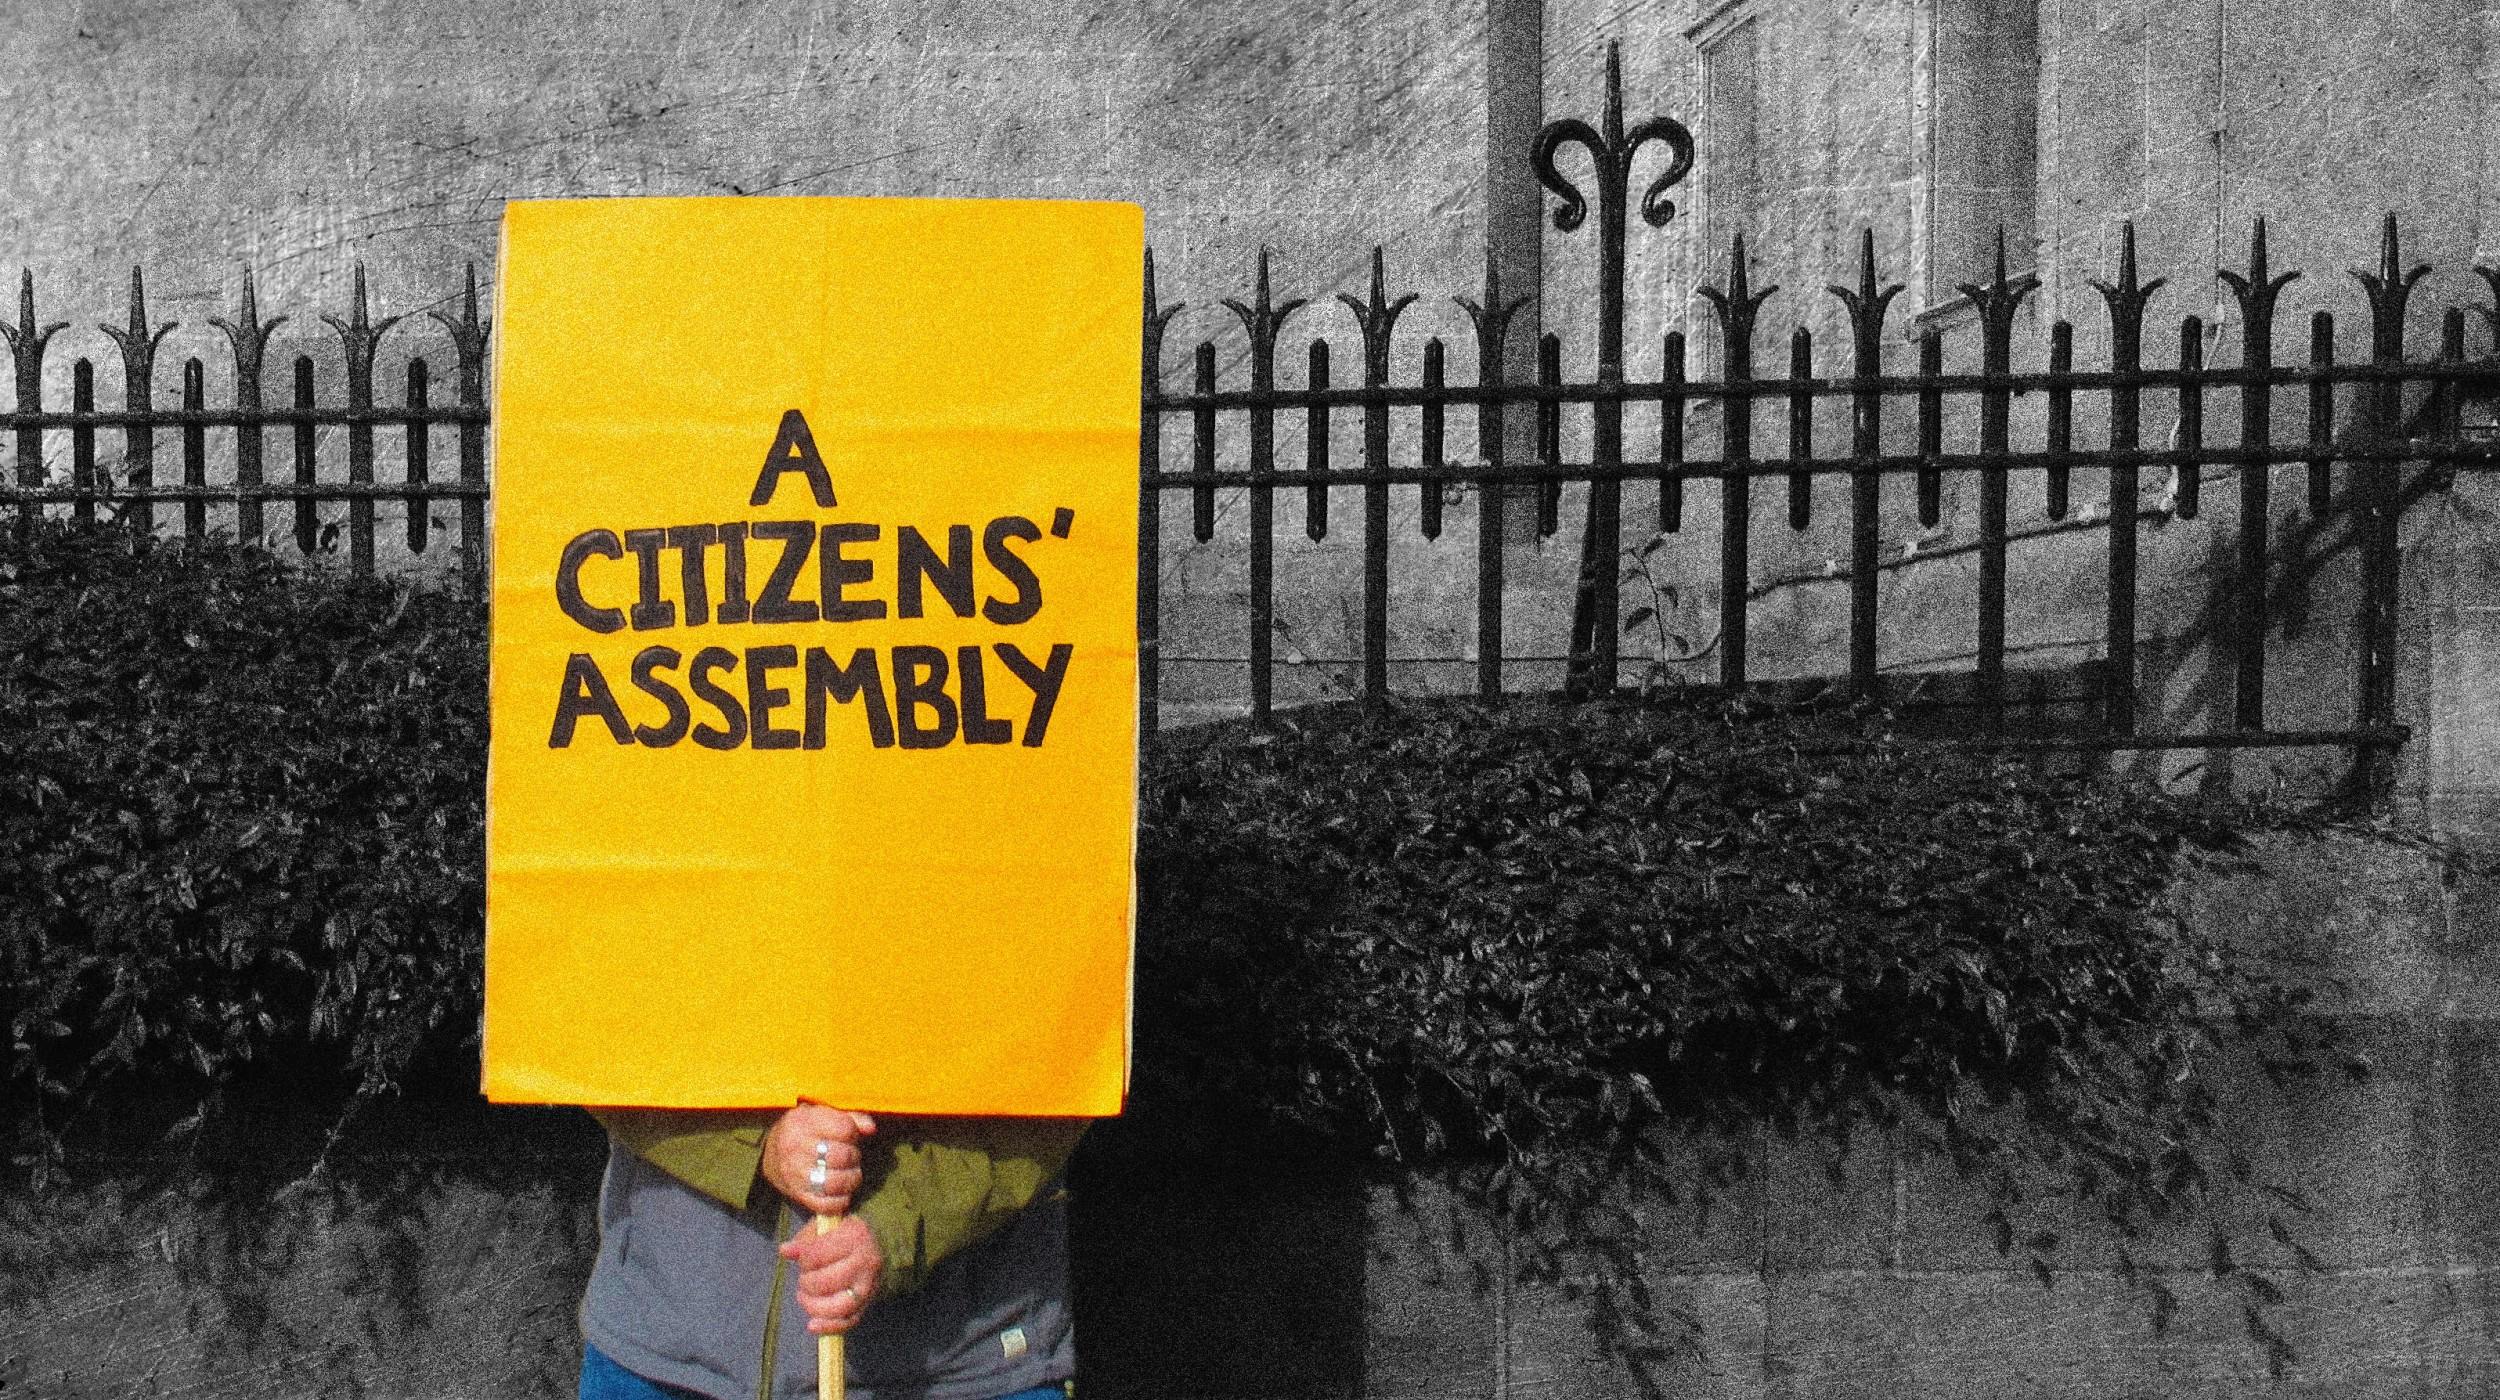 Andy Smith and Lynsey O’Sullivan: A Citizens' Assembly